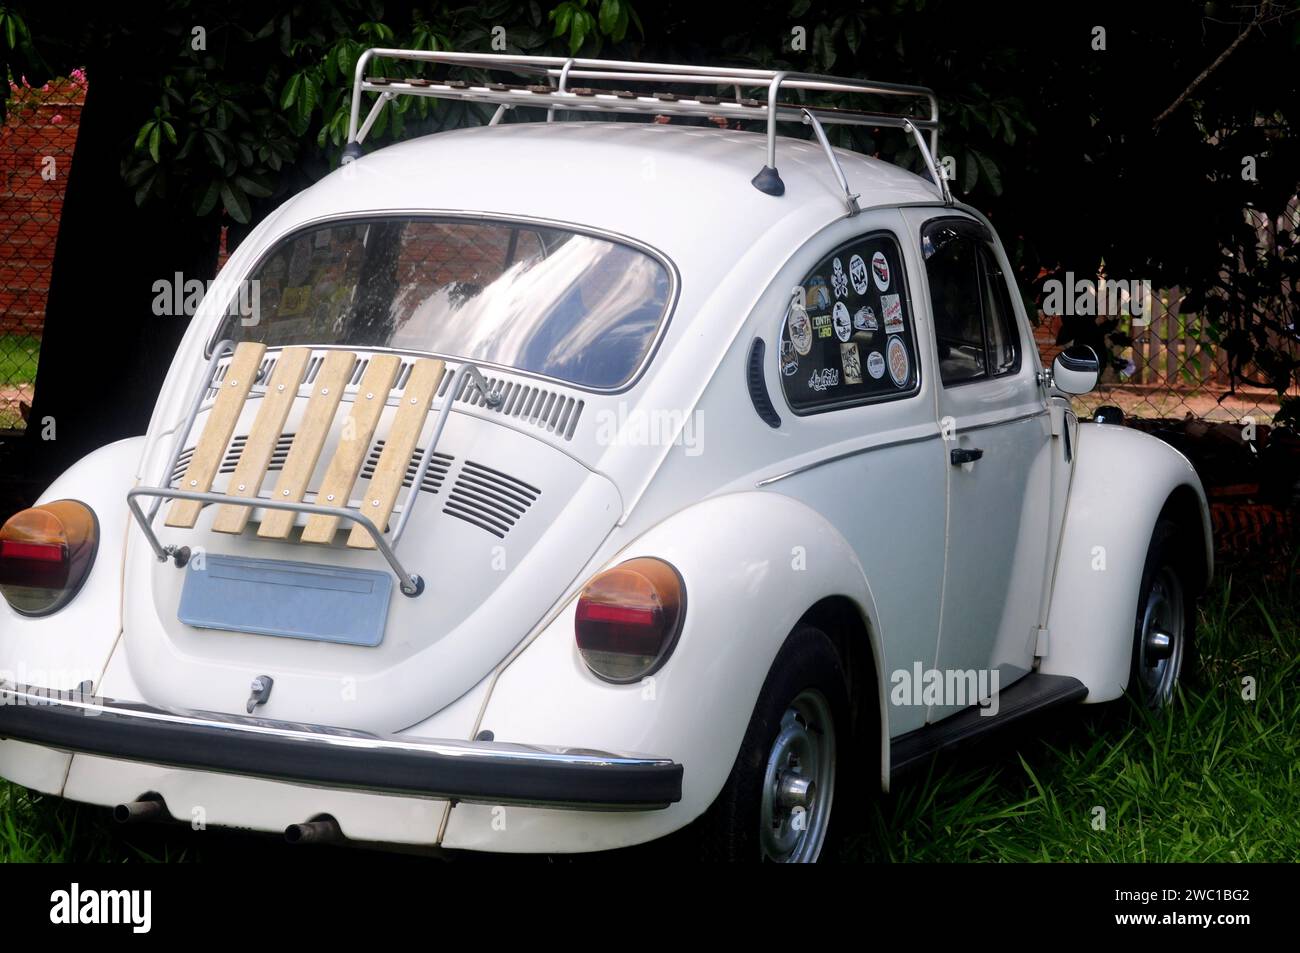 White Beetle passenger car with rear luggage rack on top. Stock Photo